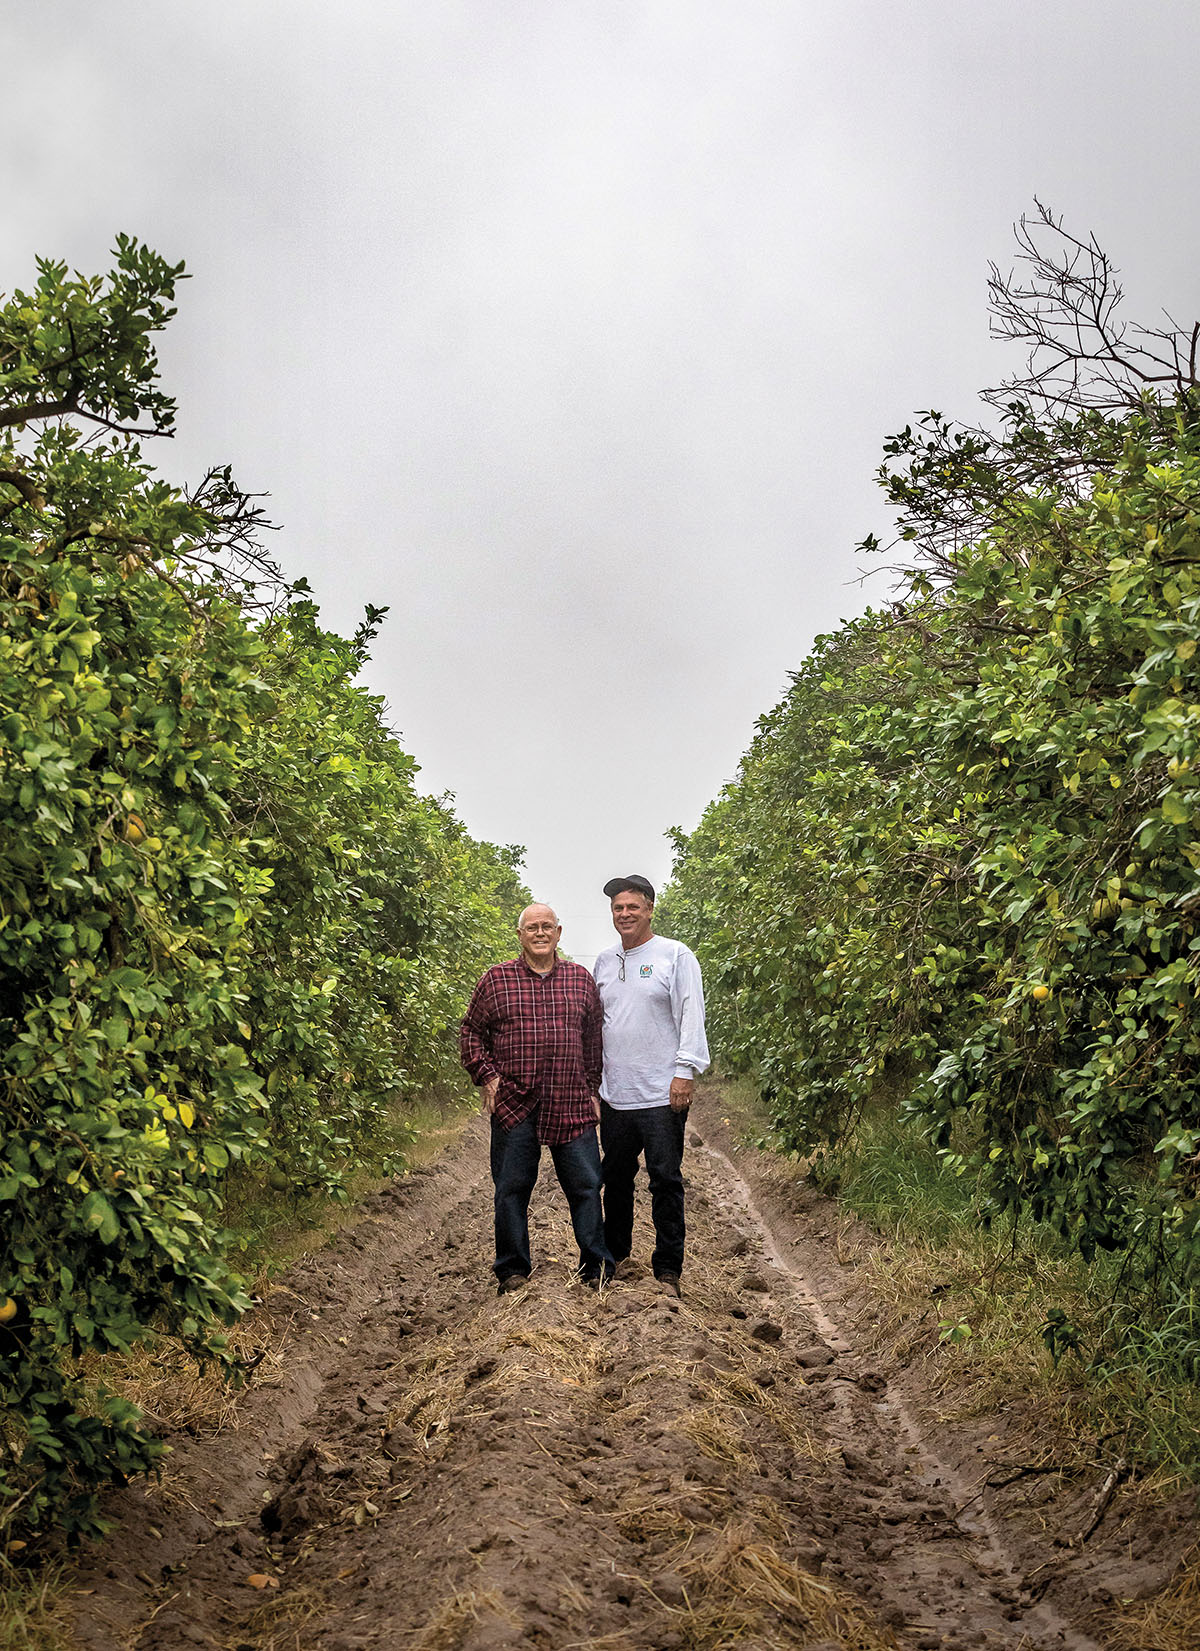 Two men stand in a citrus grove